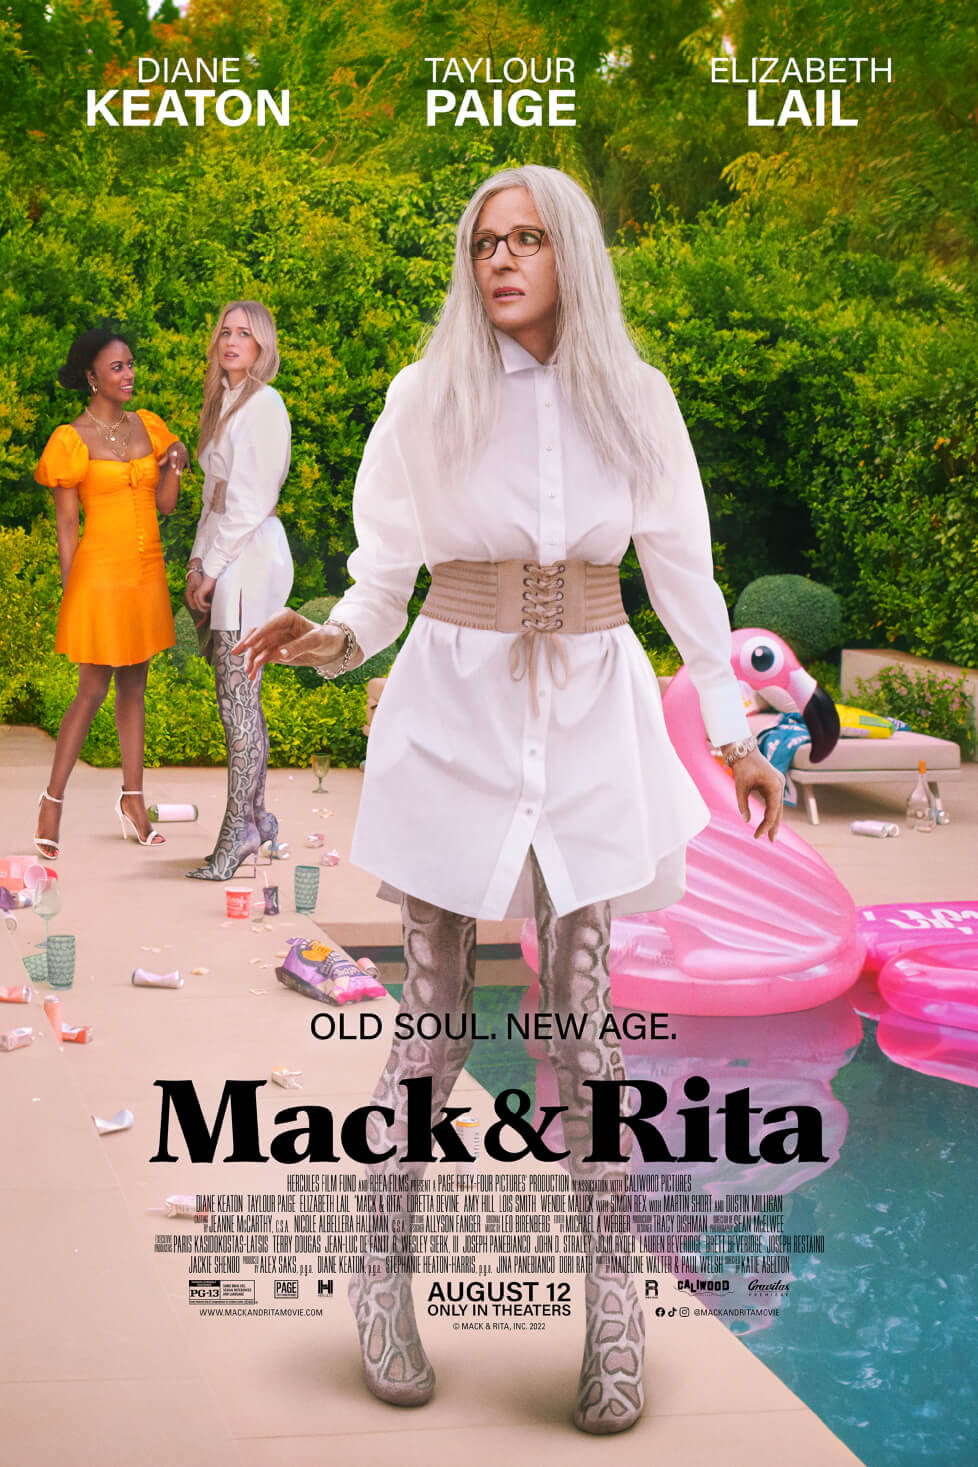 Mack & Rita Movie (2022) Cast & Crew, Release Date, Story, Review, Poster, Trailer, Budget, Collection
